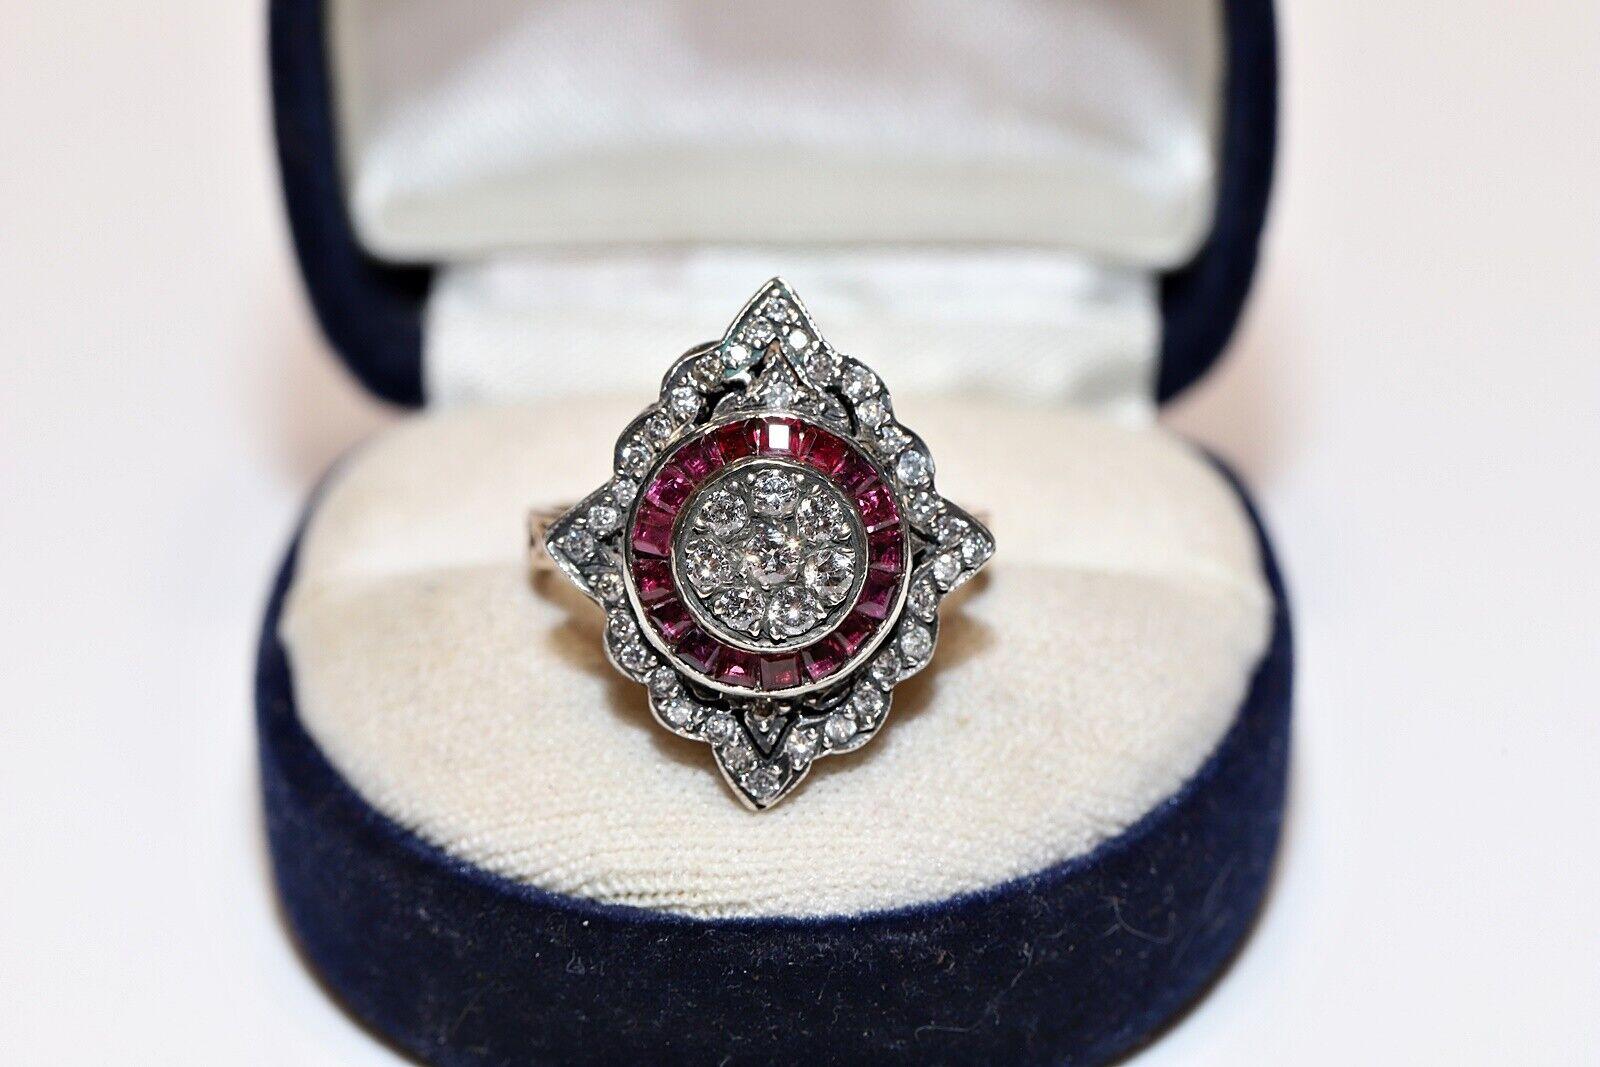 In very good condition.
Total weight is  7.4 grams.
Totally is diamond 0.90 carat.
Totally is  ruby 0.40 ct.
Ring size is US 7.8 (We offer free resizing)
Acid tested to be 8k real gold.
We can make any size.
The diamond is has vs-s1 clarity and I